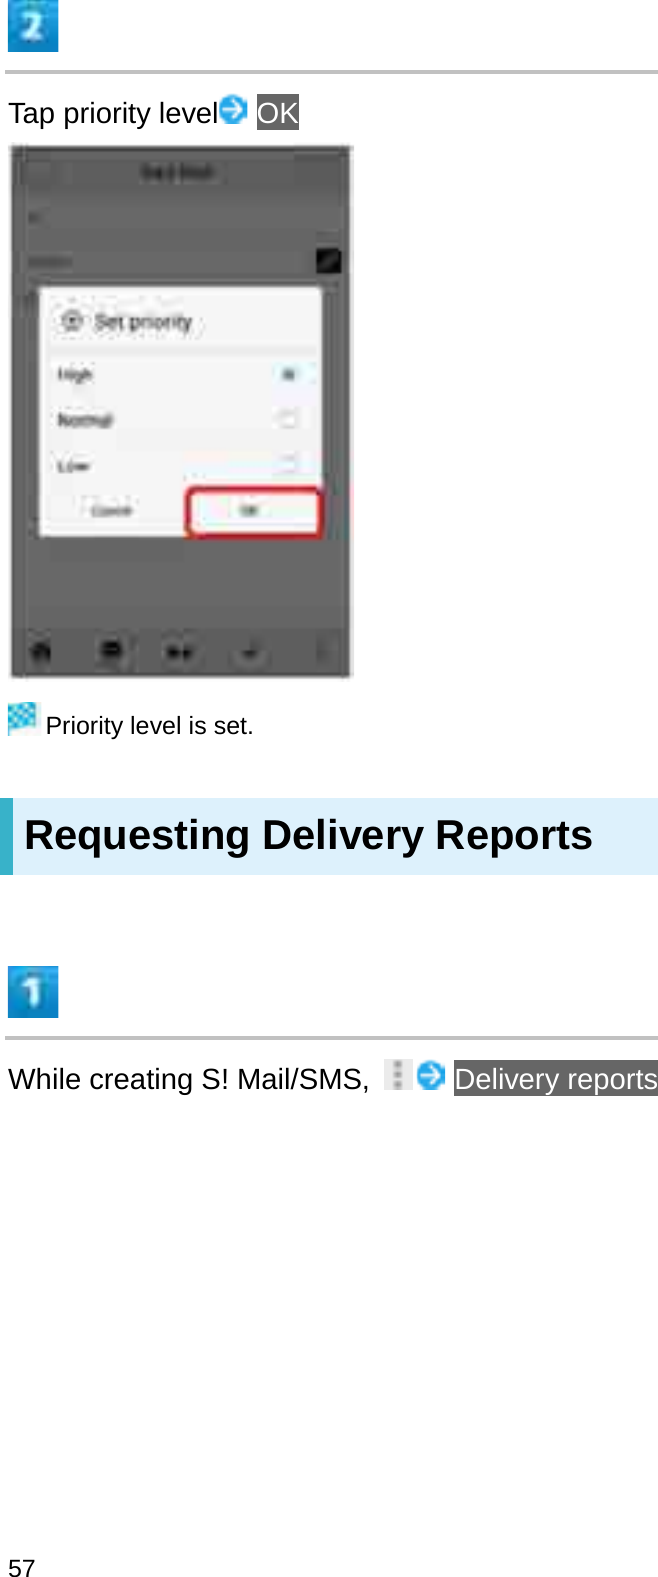 Tap priority level OKPriority level is set.Requesting Delivery ReportsWhile creating S! Mail/SMS,  Delivery reports57